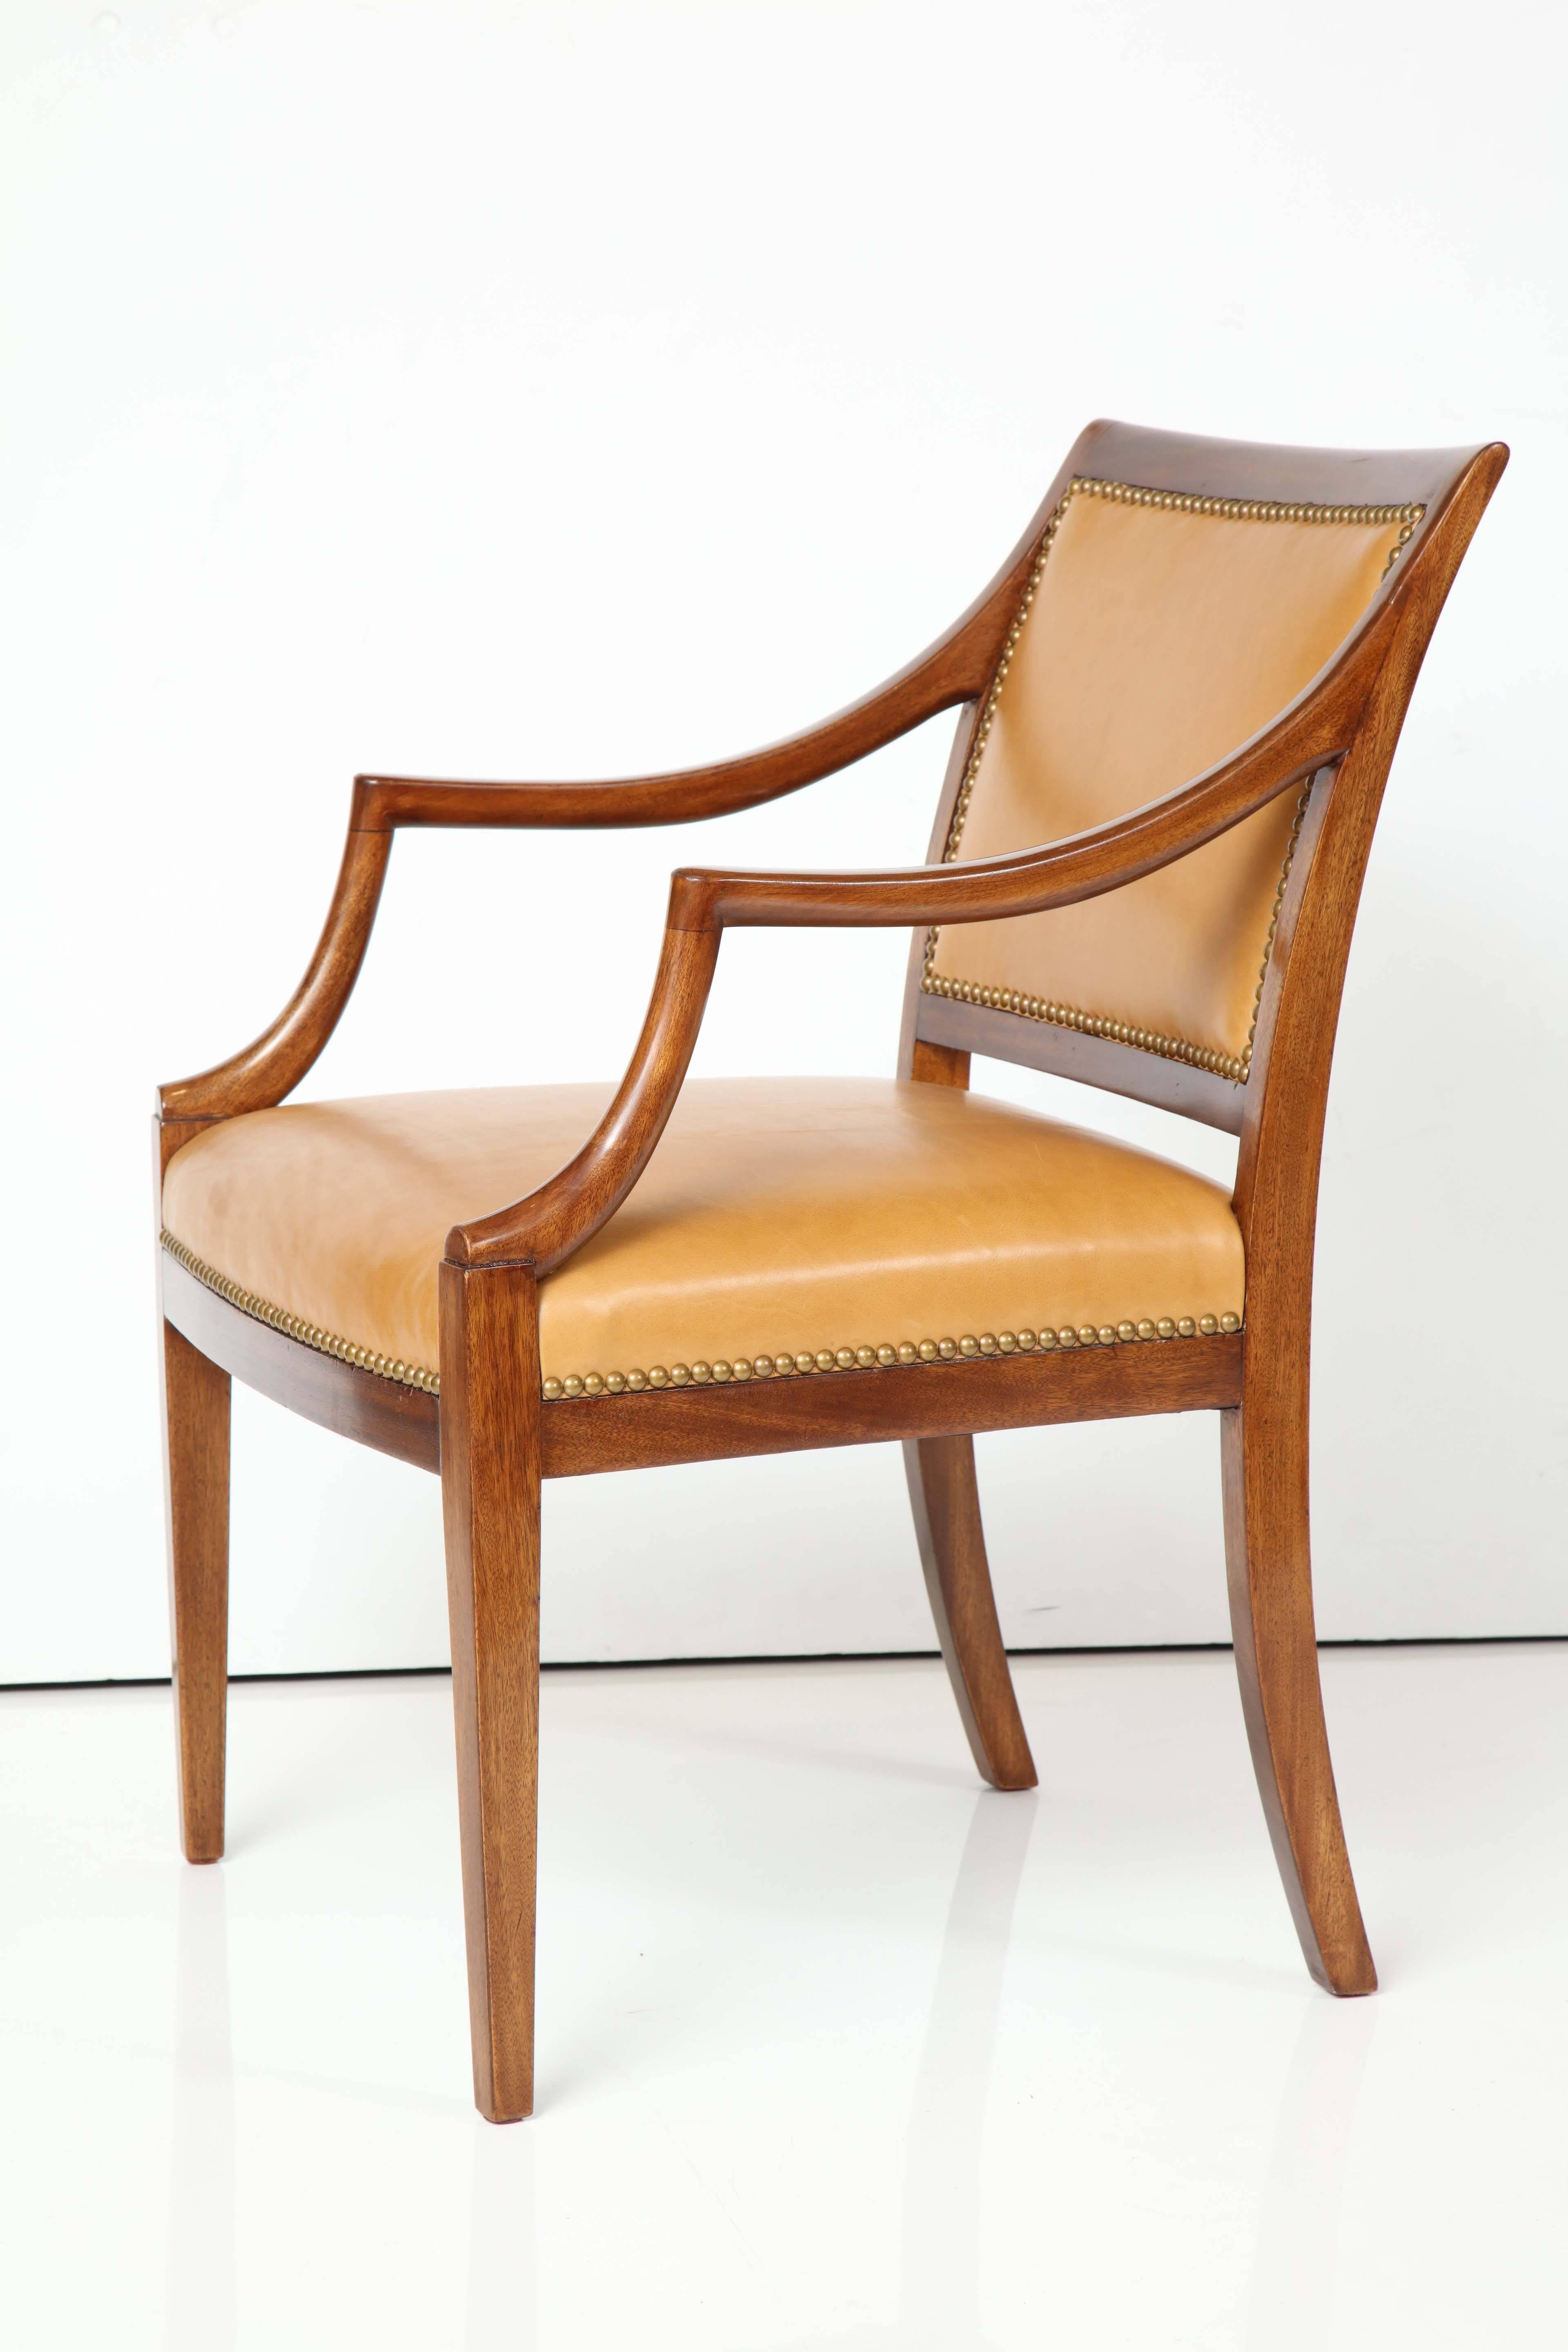 A Frits Henningsen mahogany open armchair with leather seat and back finished with French nailheads, circa 1940s, a rich mahogany frame with downswept armrests raised on square tapered legs. New leather upholstery.